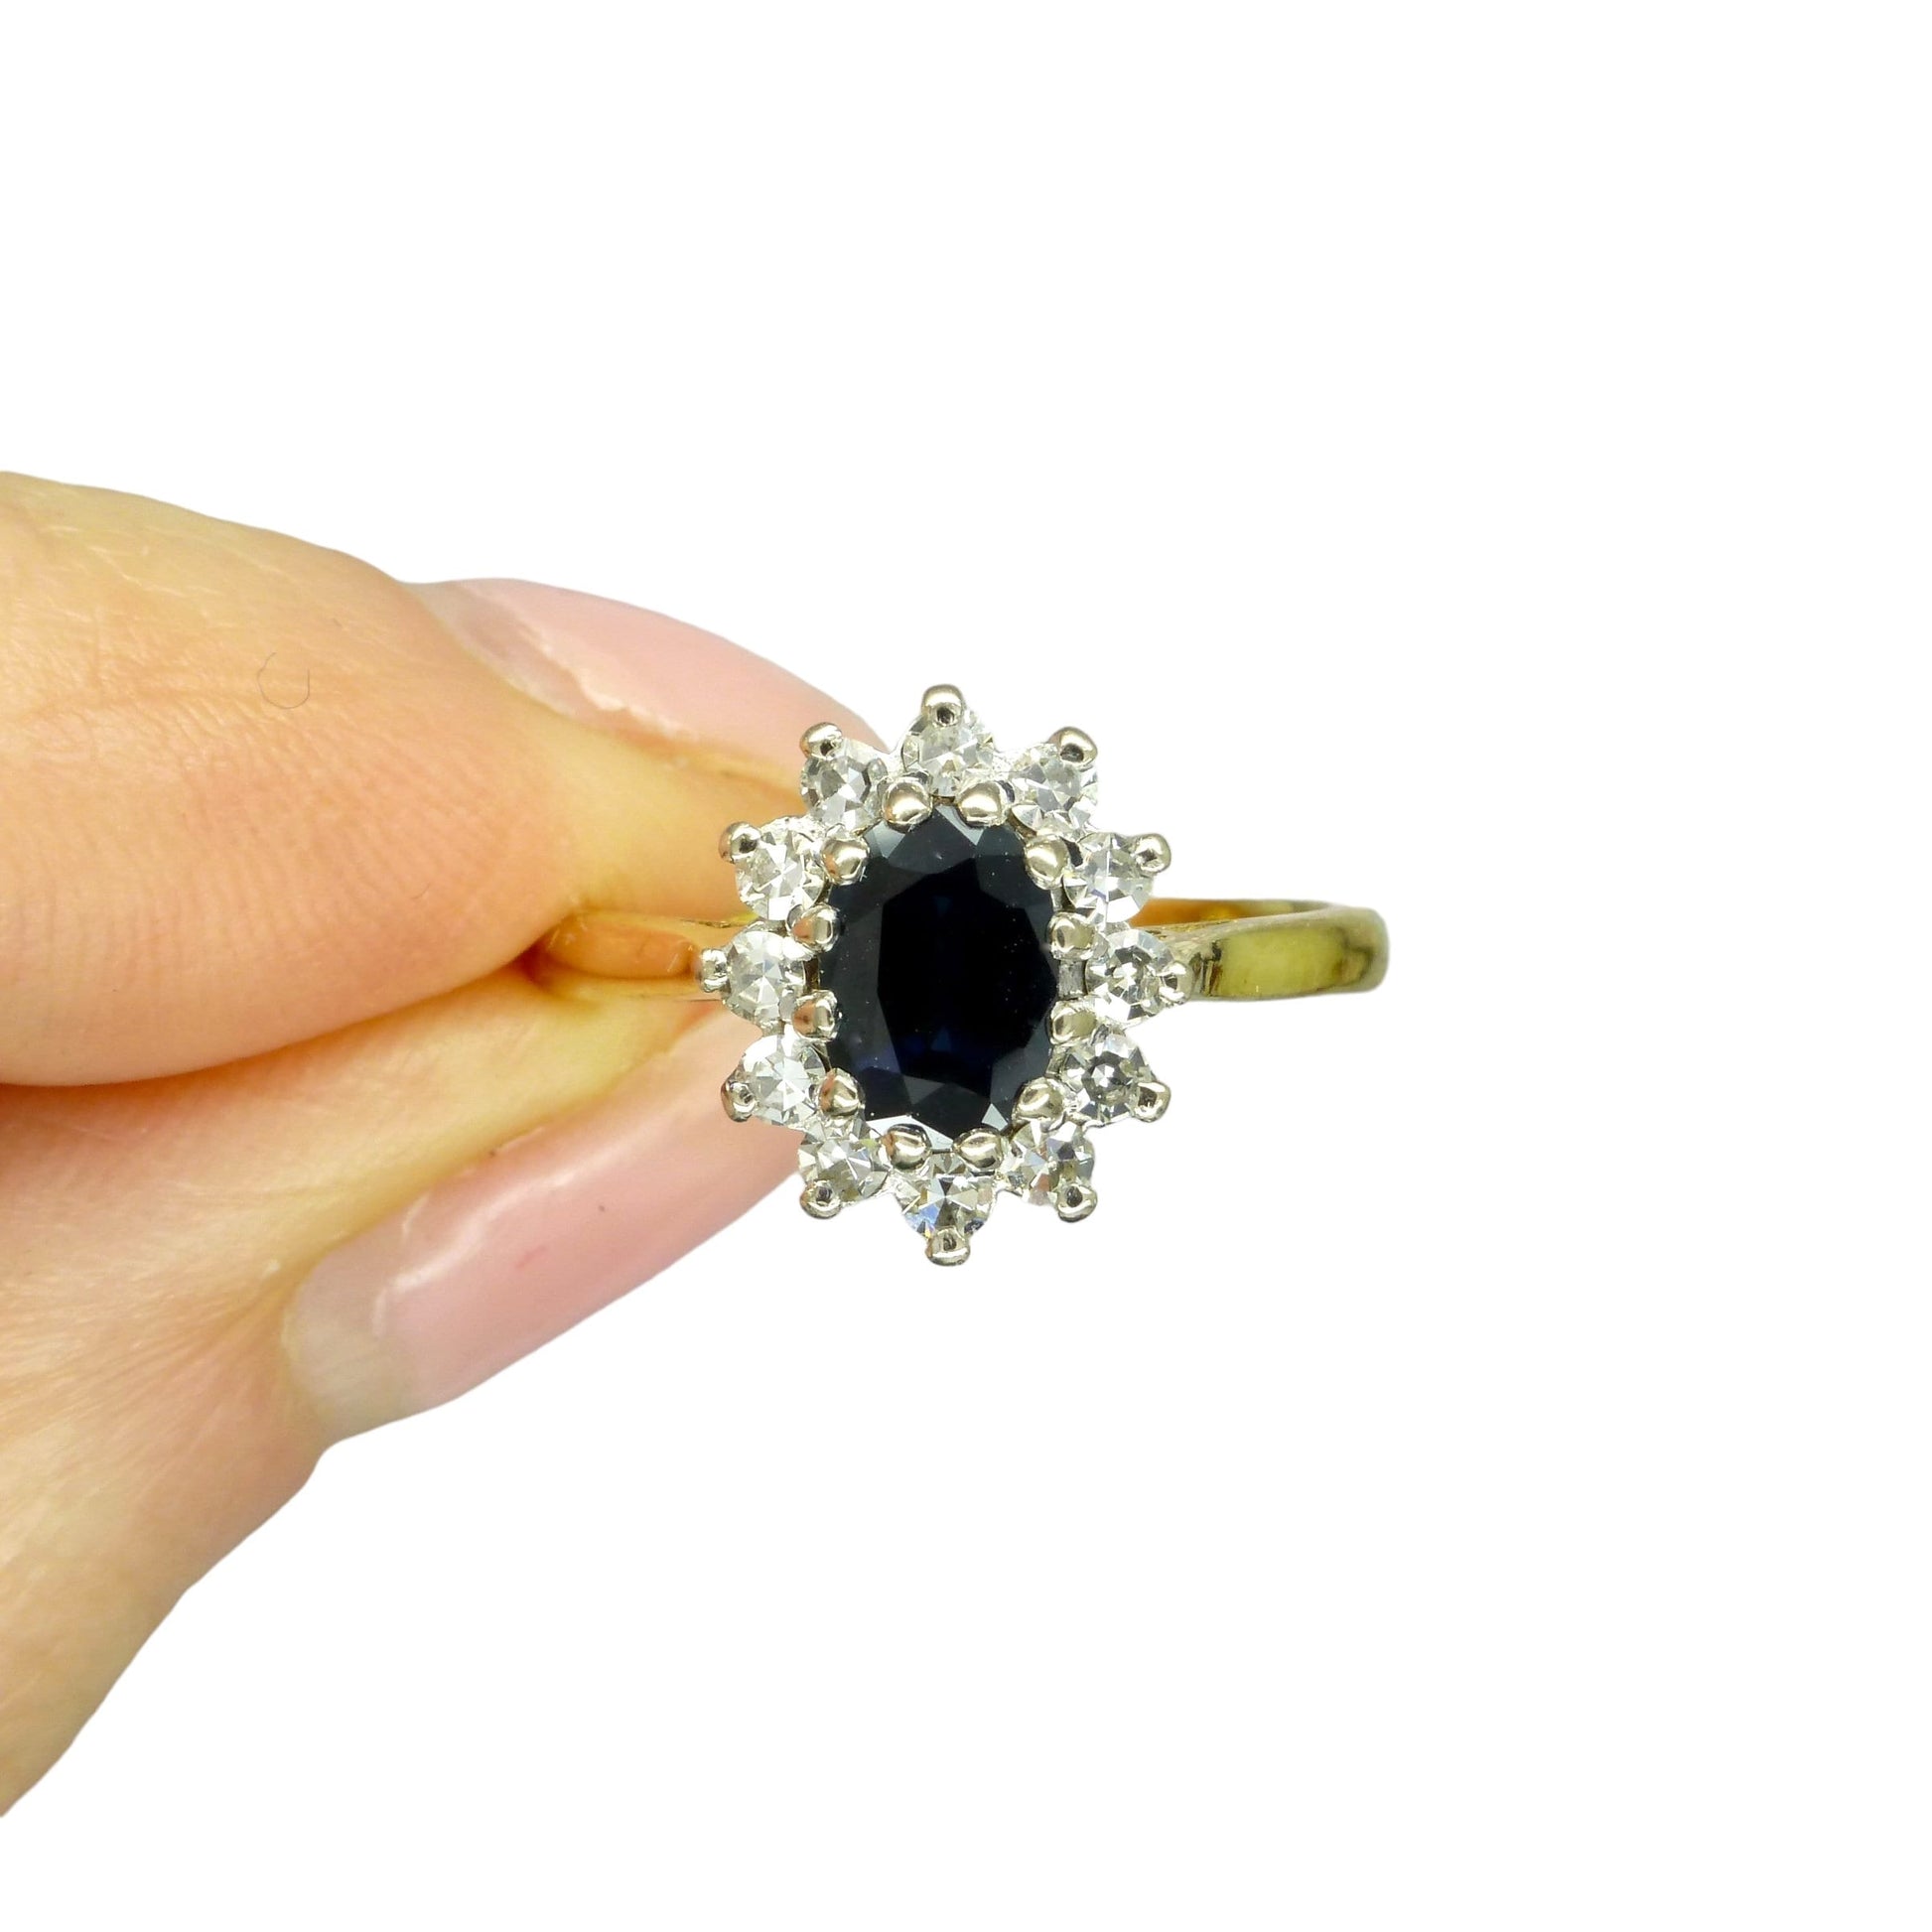 Vintage 18ct gold Sapphire & Diamond oval cluster engagement ring - Princess of Wales ring